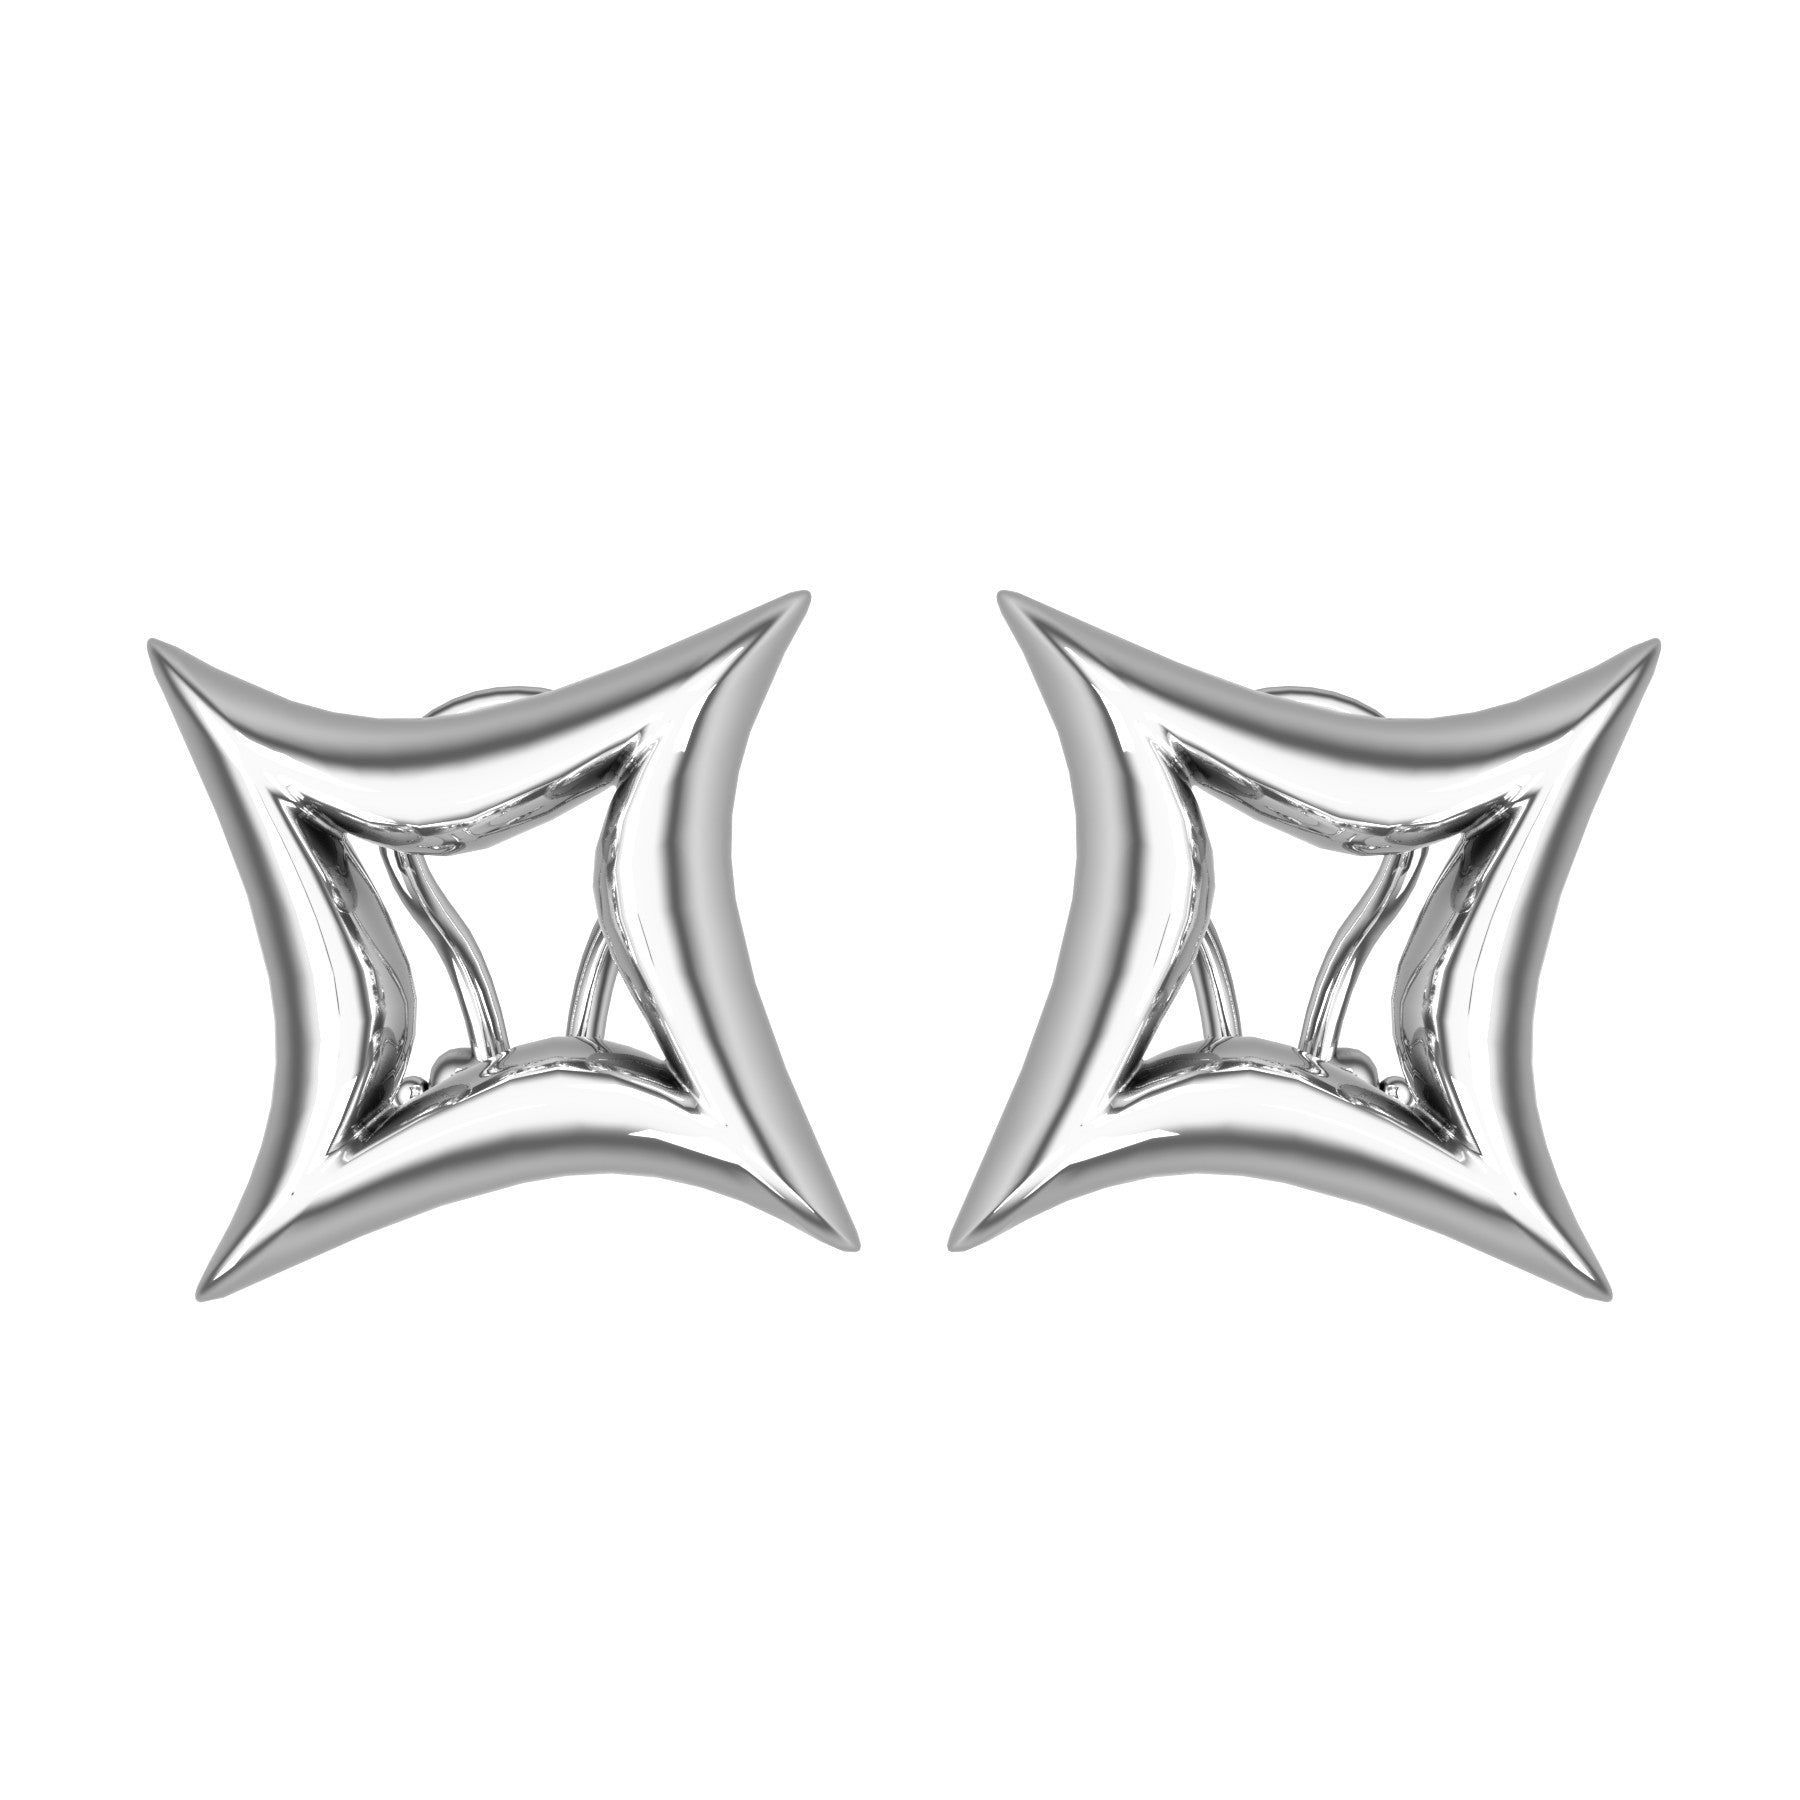 etoiles bizarres earrings, sterling silver, weight about 8,0 g. (0.28 oz) size 16,6x16,6x4,5 mm